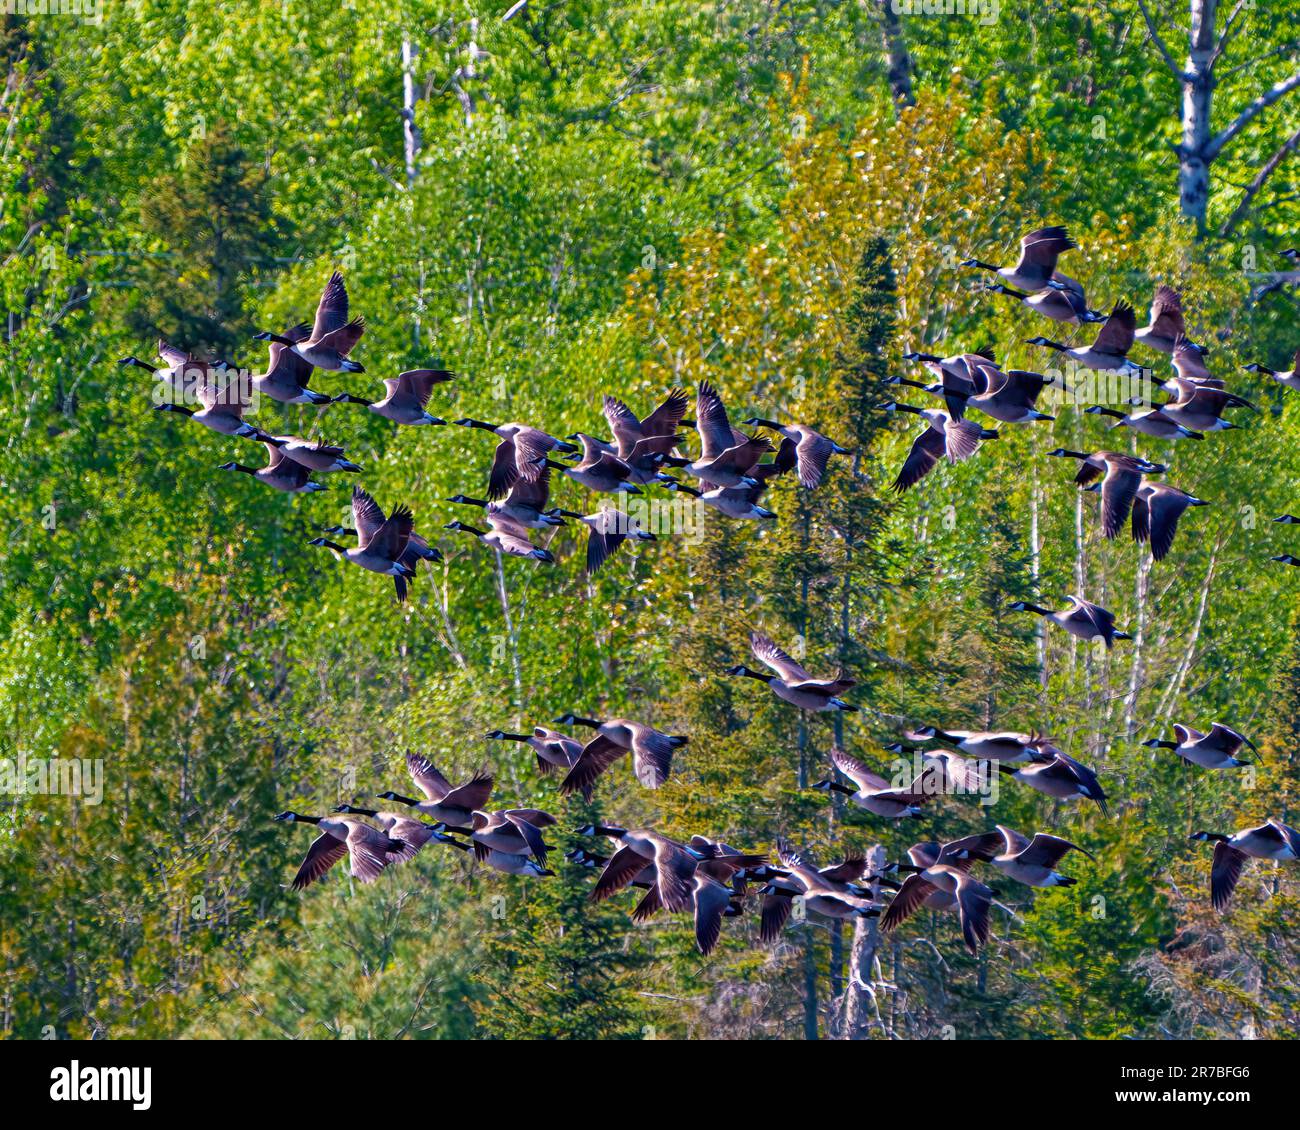 Group of Canada Geese flying over evergreen trees background in their environment and habitat surrounding.  Flock of birds. Flying birds. Stock Photo